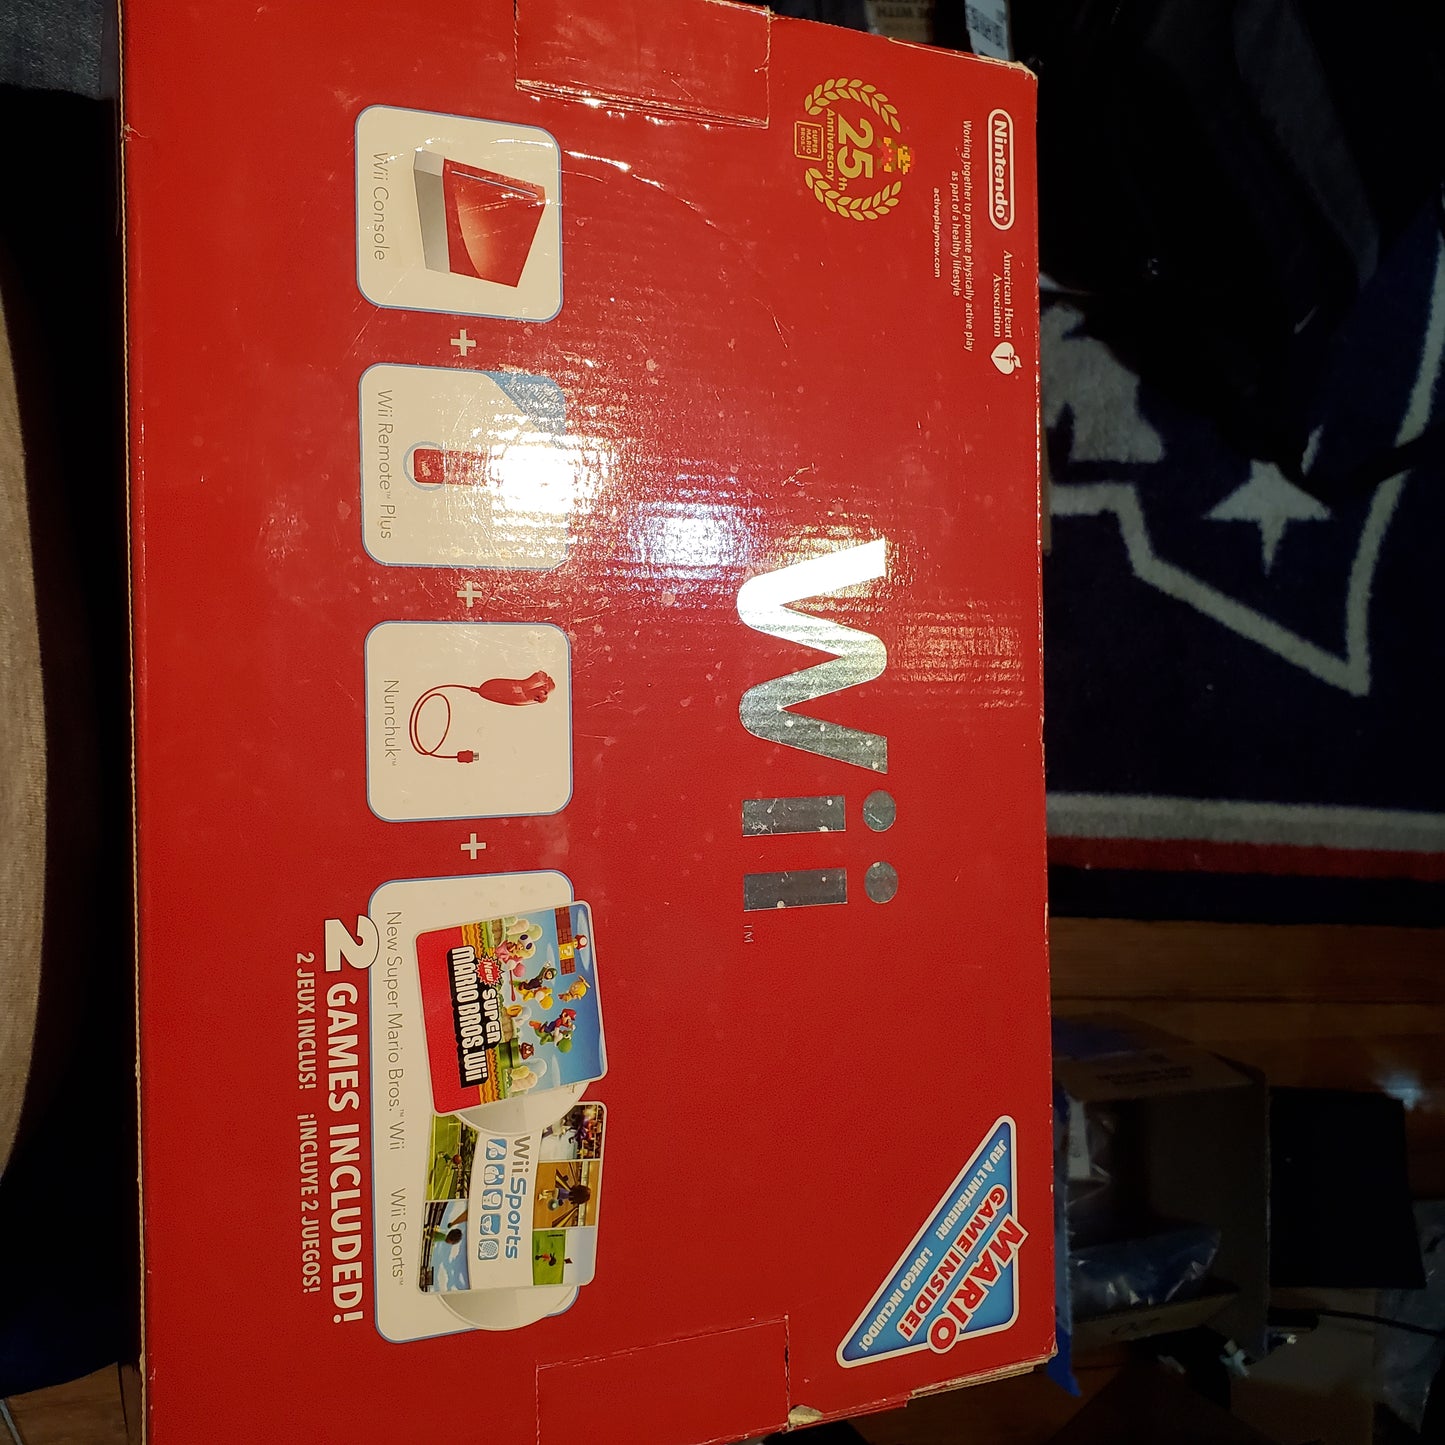 Nintendo Wii 25 Anniversary Edition Red Console with New Super Mario Bros and Wii Sports  - Wii